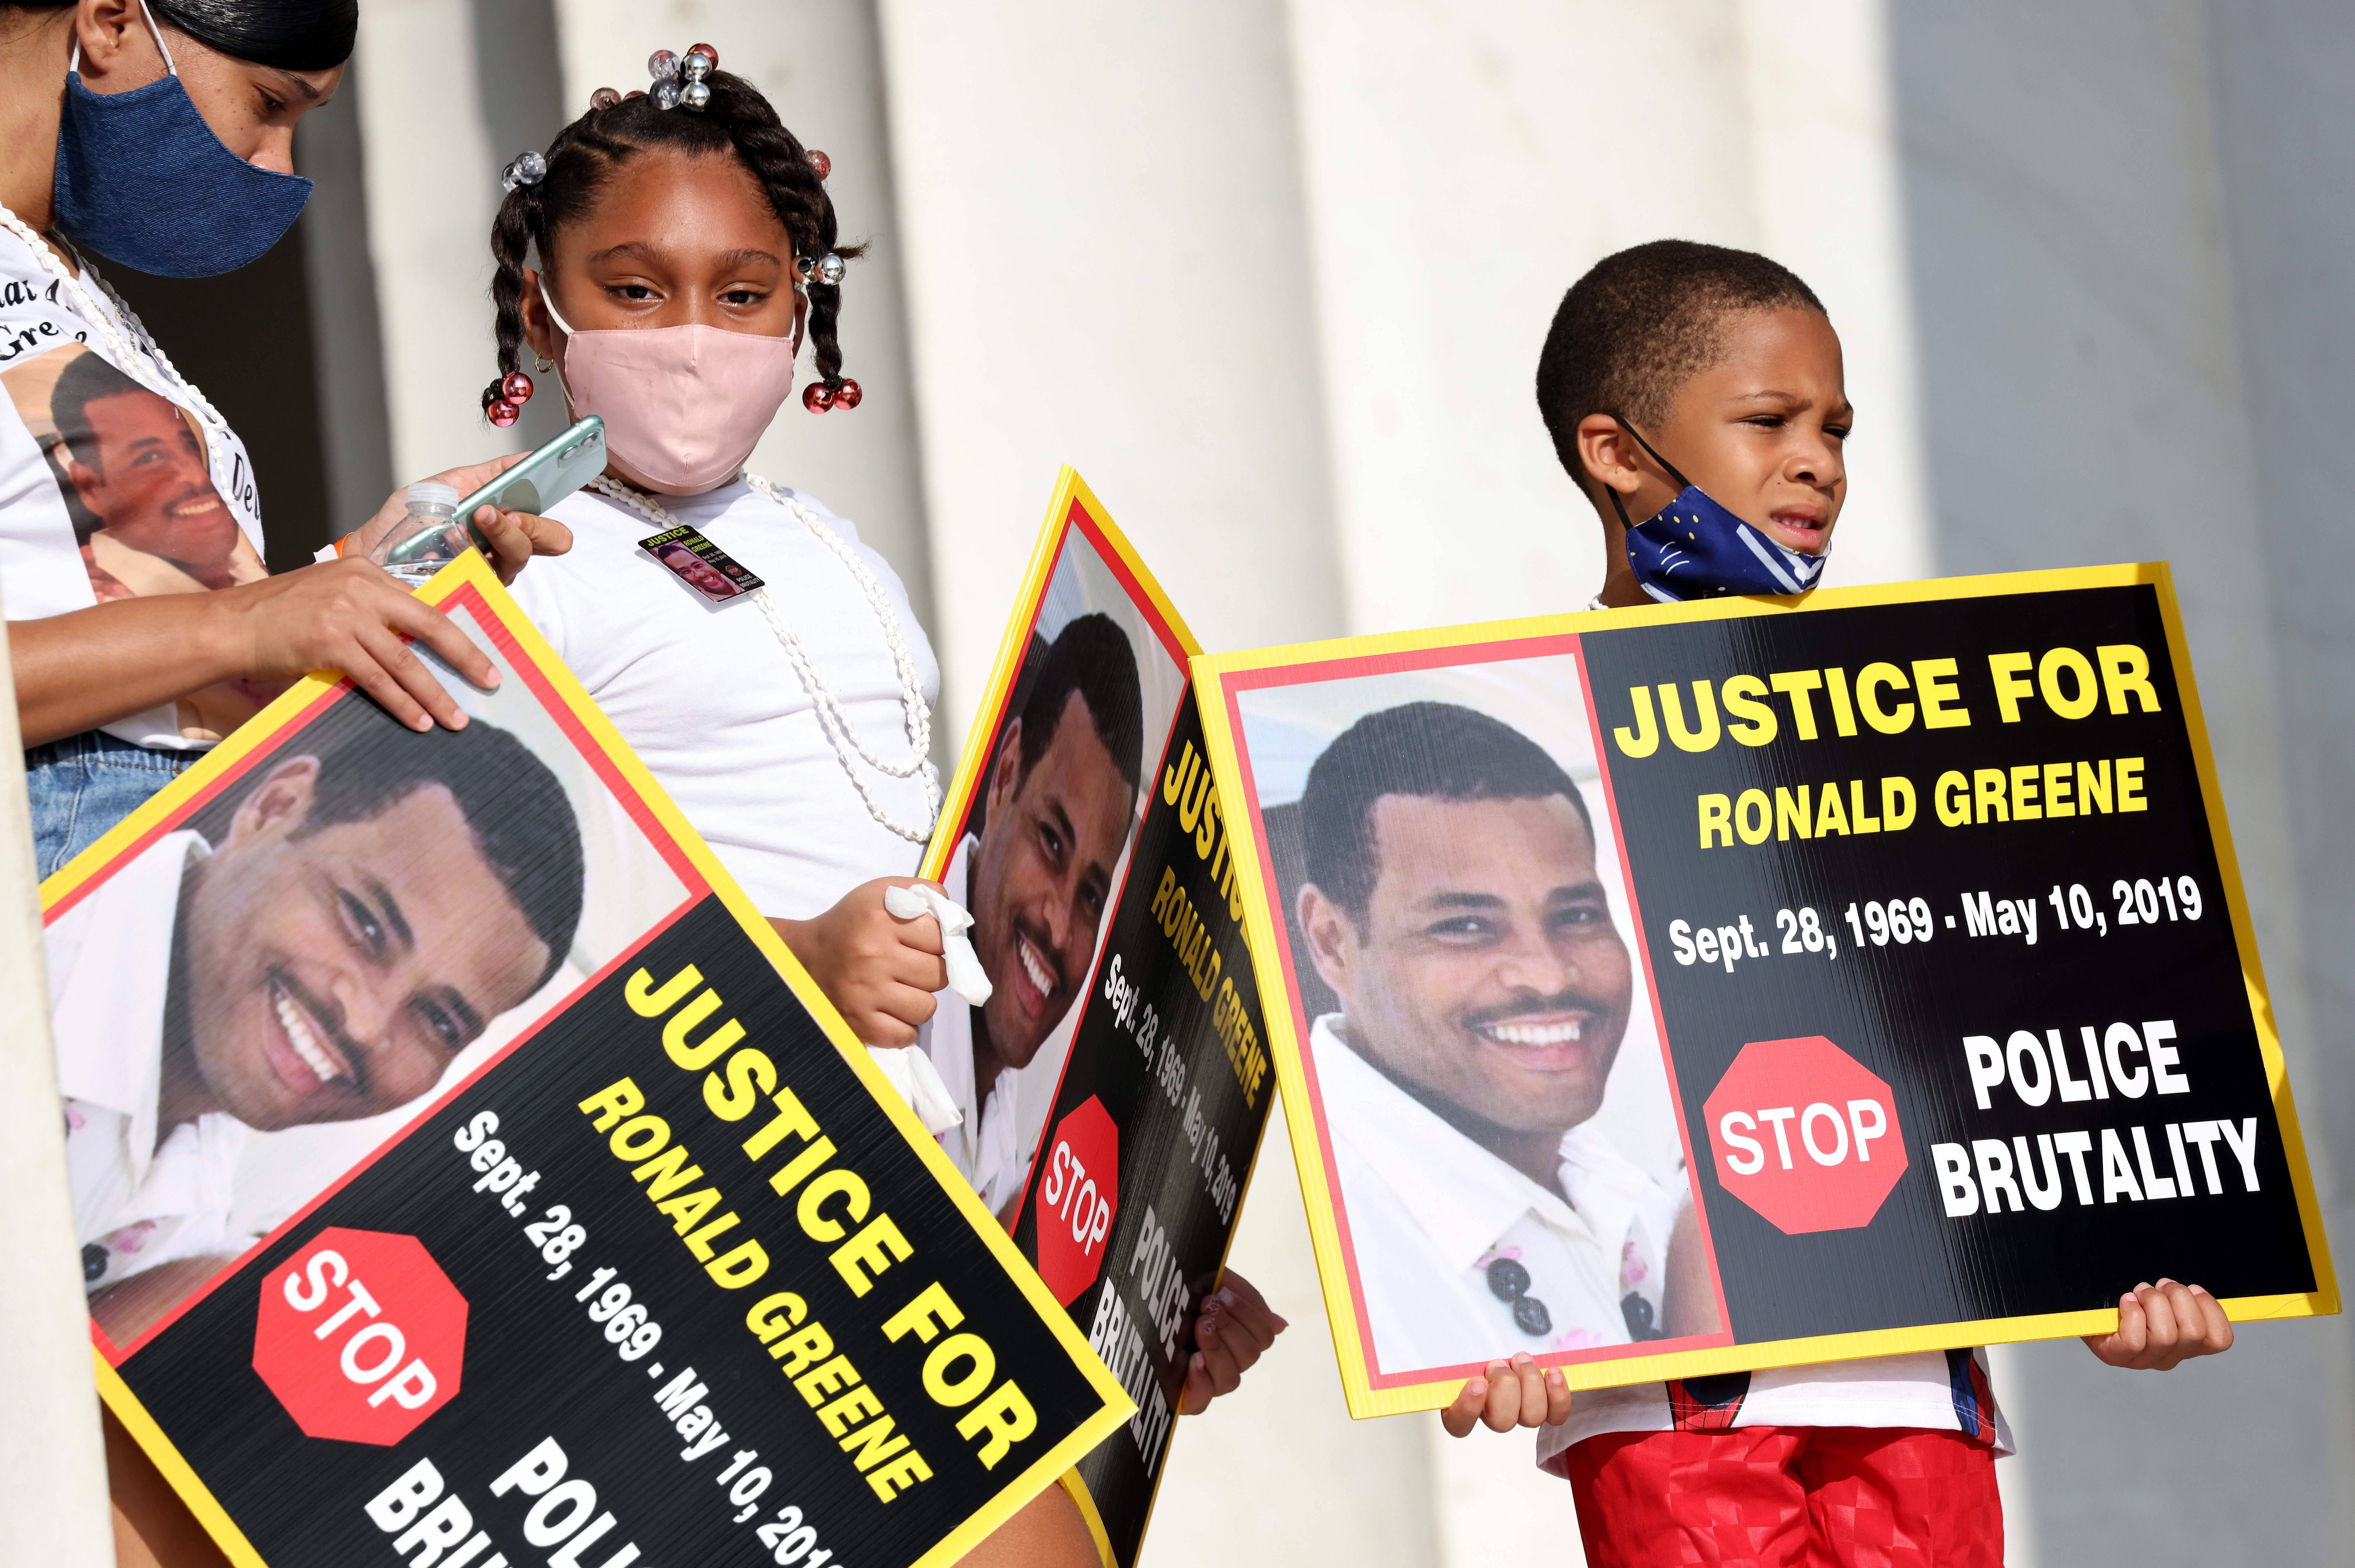 Family members of Ronald Greene listen to speakers during the "Commitment March: Get Your Knee Off Our Necks" protest against racism and police brutality, at the Lincoln Memorial on August 28, 2020, in Washington DC. Greene died in police custody following a high-speed chase in Louisiana in 2019. - Anti-racism protesters marched on the streets of the US capital on Friday, after a white officer's shooting of African American Jacob Blake. The protester also marked the 57th anniversary of civil rights leader Martin Luther King's historic "I Have a Dream" speech delivered at the Lincoln Memorial. (Photo by Michael M. Santiago / POOL / AFP) (Photo by MICHAEL M. SANTIAGO/POOL/AFP via Getty Images)